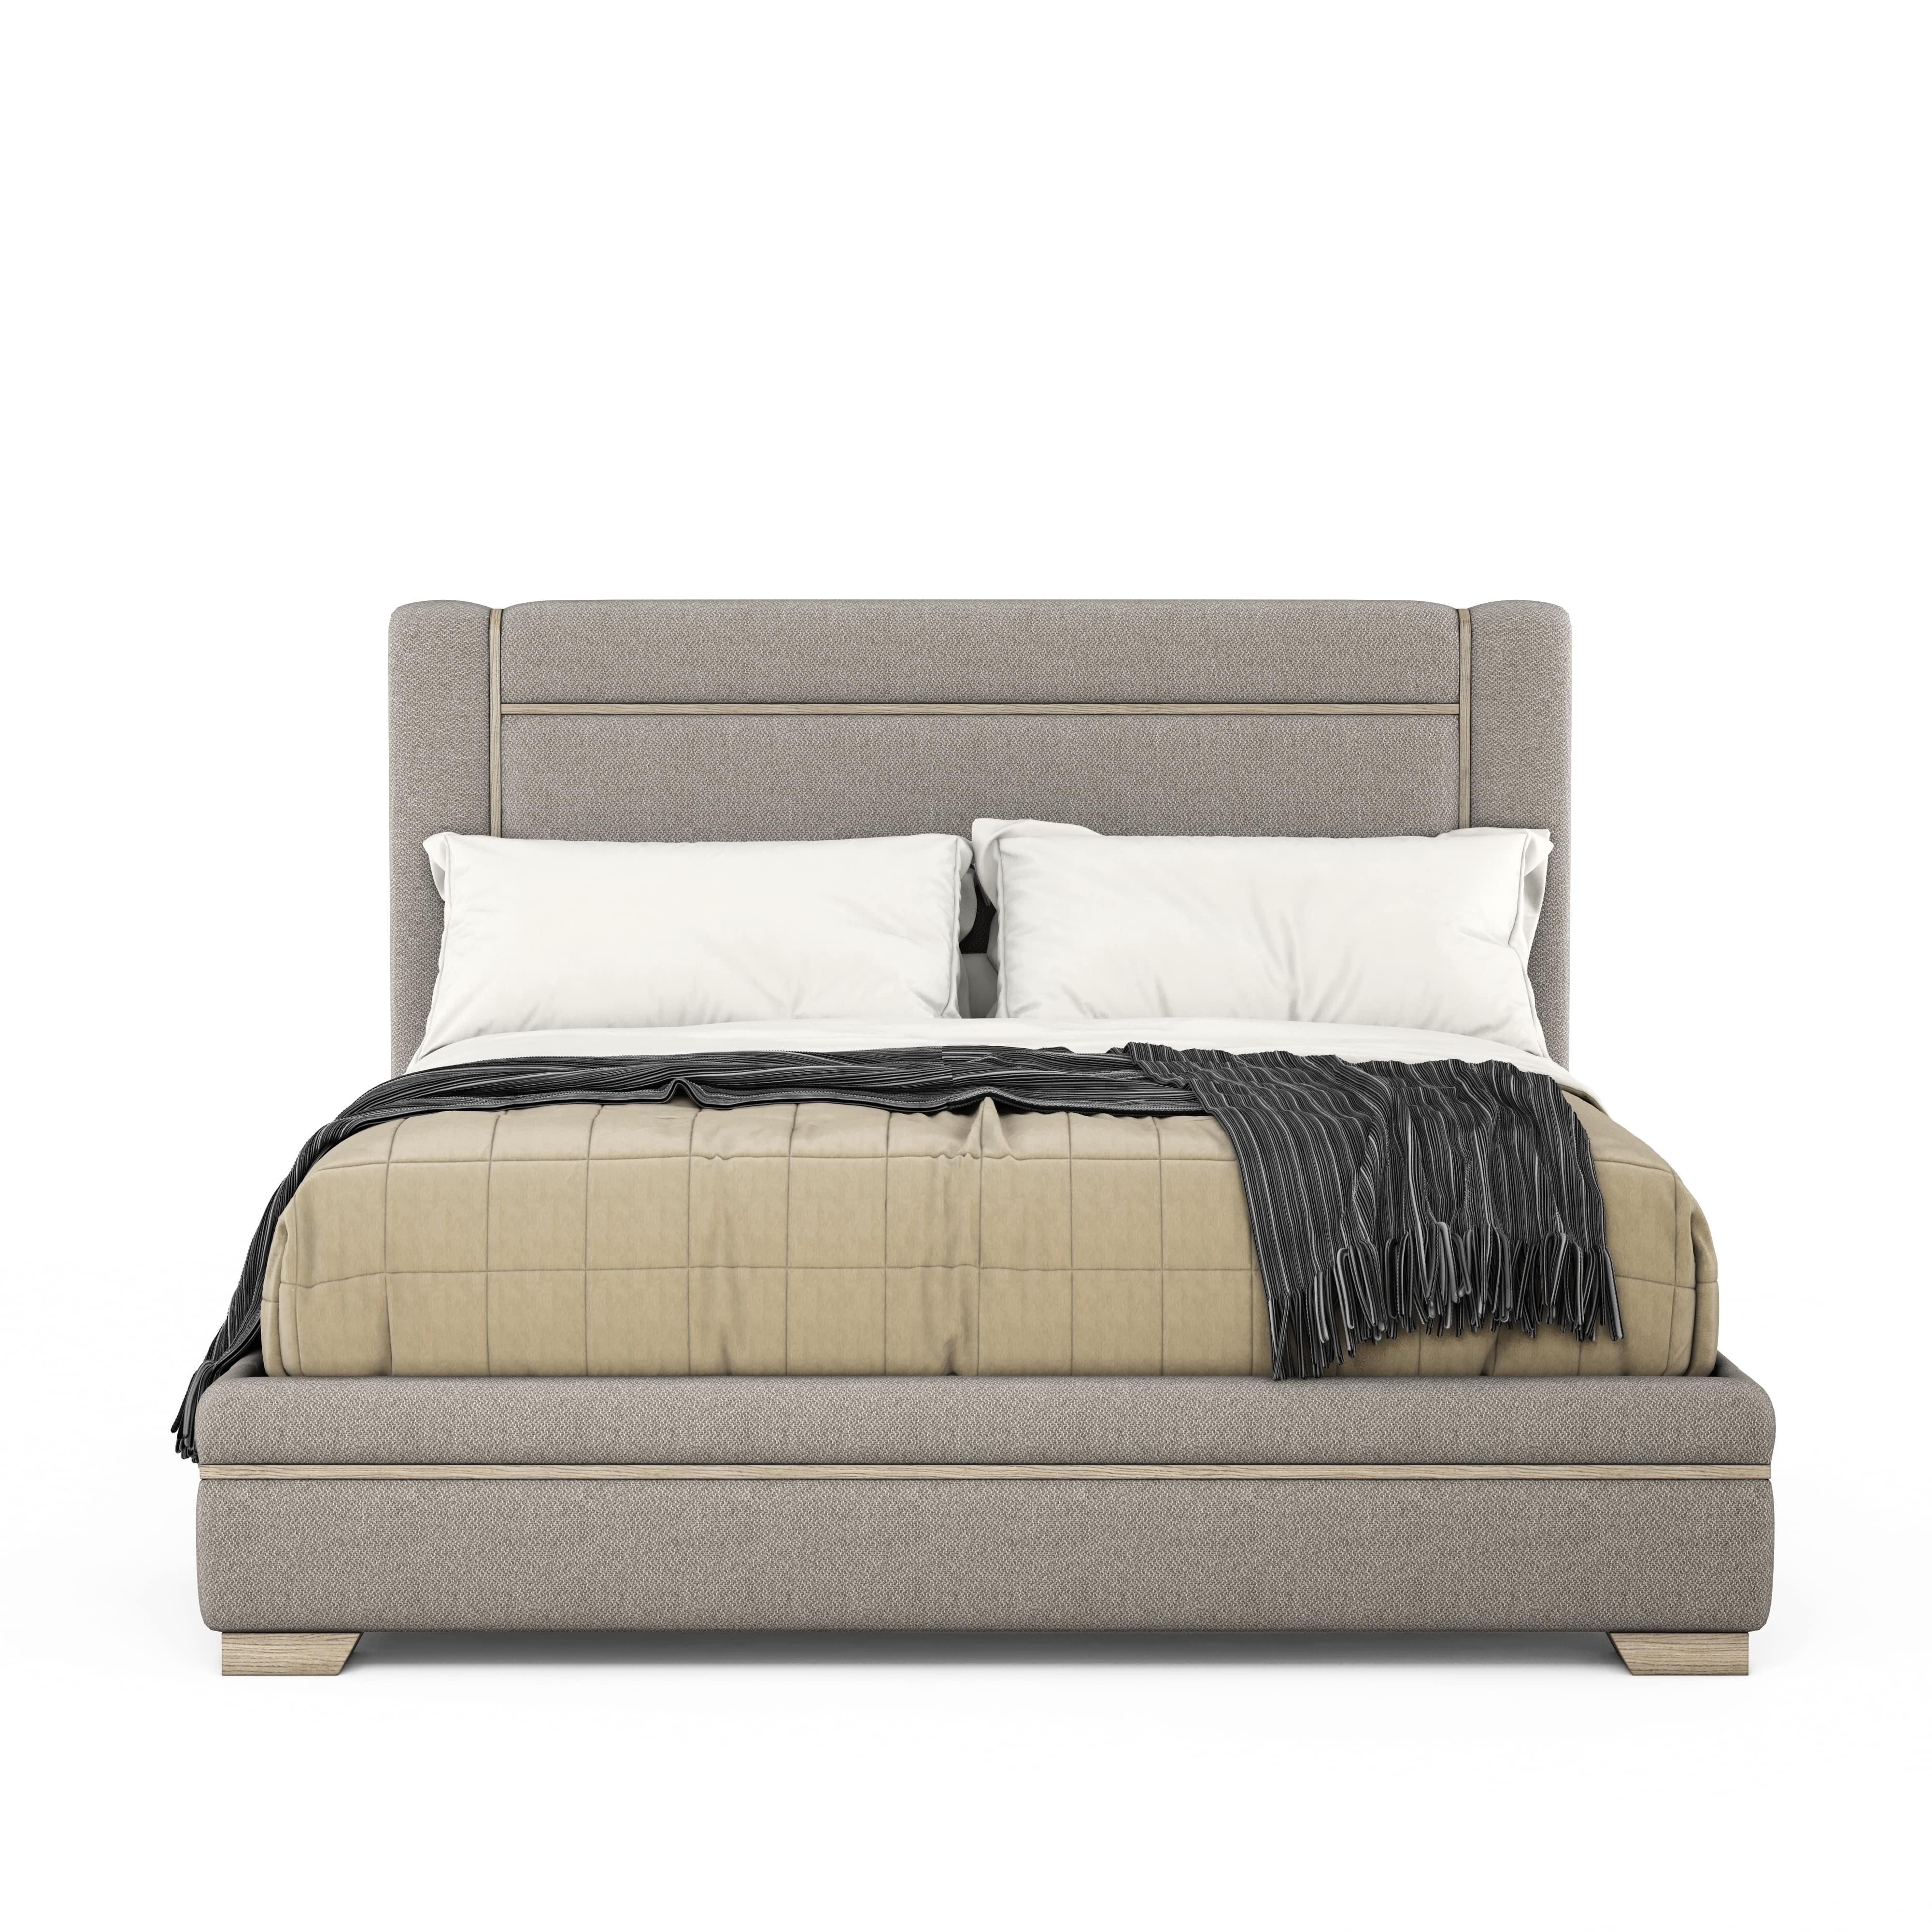 Modern, Transitional Platform Bed North Side 269125-2556 in Light Gray Fabric